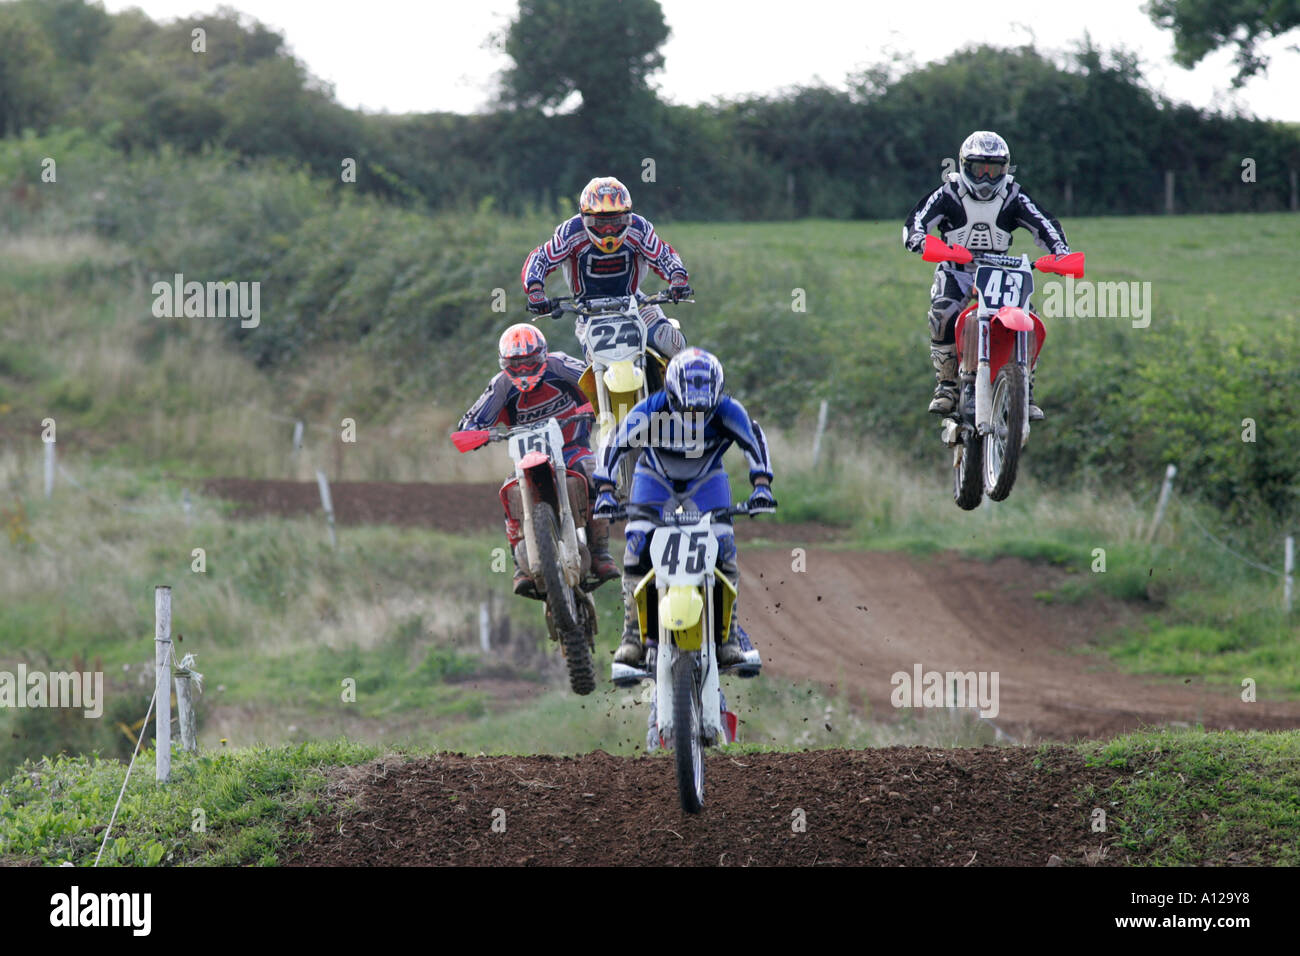 riders going over jumps during motocross race at tandragee motocross circuit county down northern ireland Stock Photo